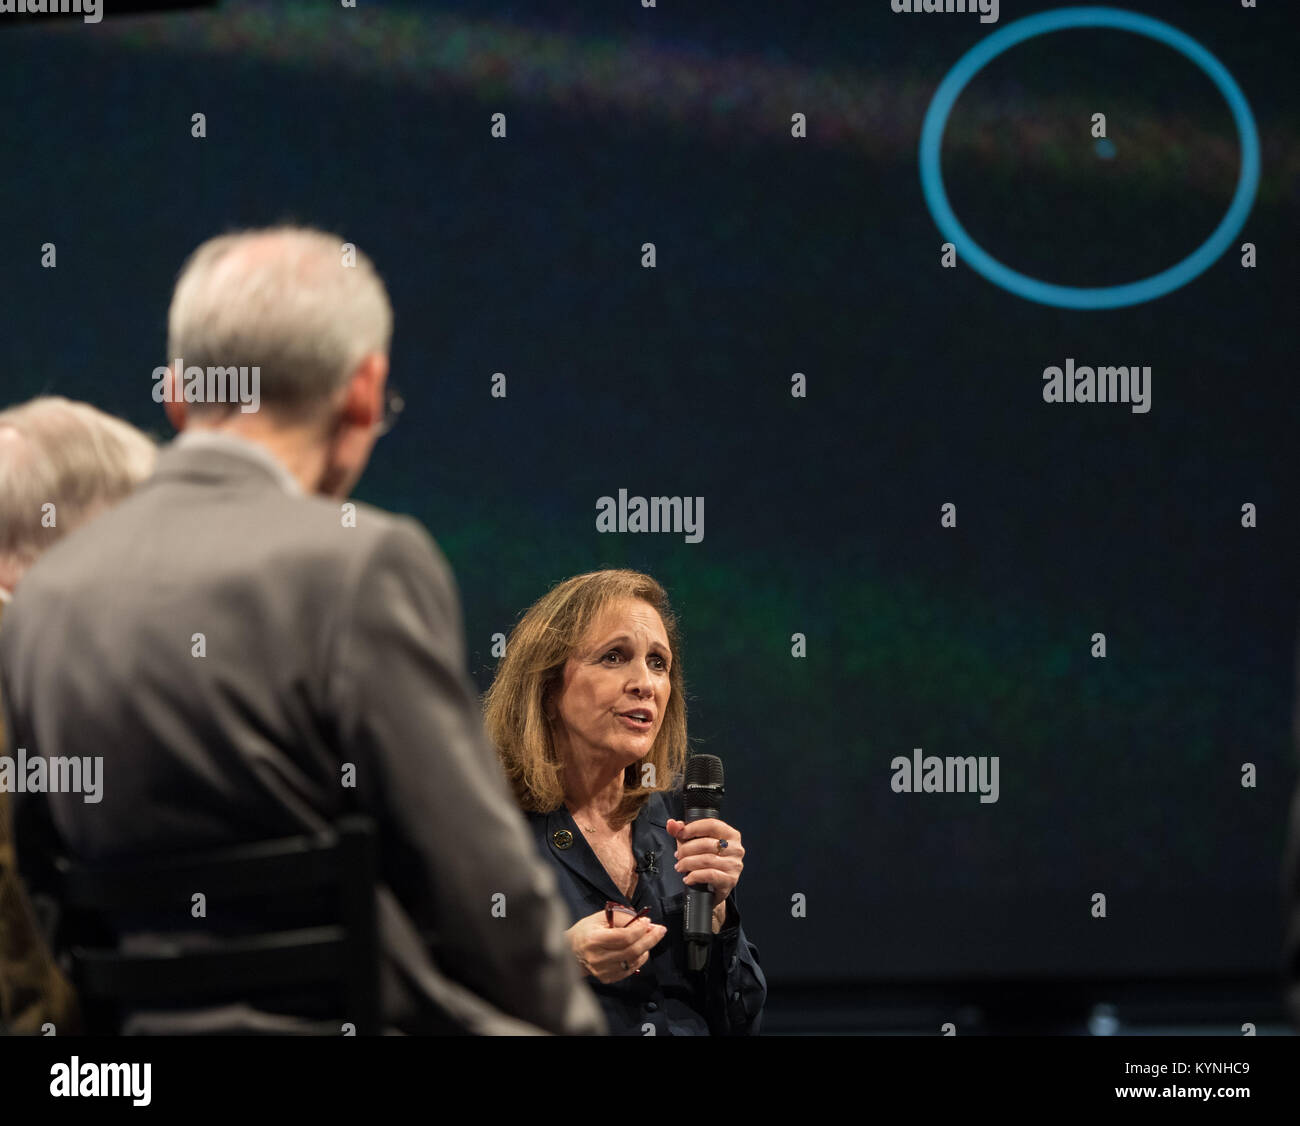 Ann Druyan, writer/producer and golden record visionary, speaks about the last image of Earth from the Voyager spacecraft, at an event to celebrate the 40th Anniversary of the launch of the Voyager 1 and 2 missions, Tuesday, September 5, 2017 at Smithsonian's National Air and Space Museum in Washington. Voyager 1 was launched September 5, 1977, with a mission to study Jupiter and Saturn, but now the twin Voyager spacecrafts are on a journey into interstellar space to search for the heliopause, a region never reached by any other spacecraft. Photo Credit: (NASA/Aubrey Gemignani) Stock Photo